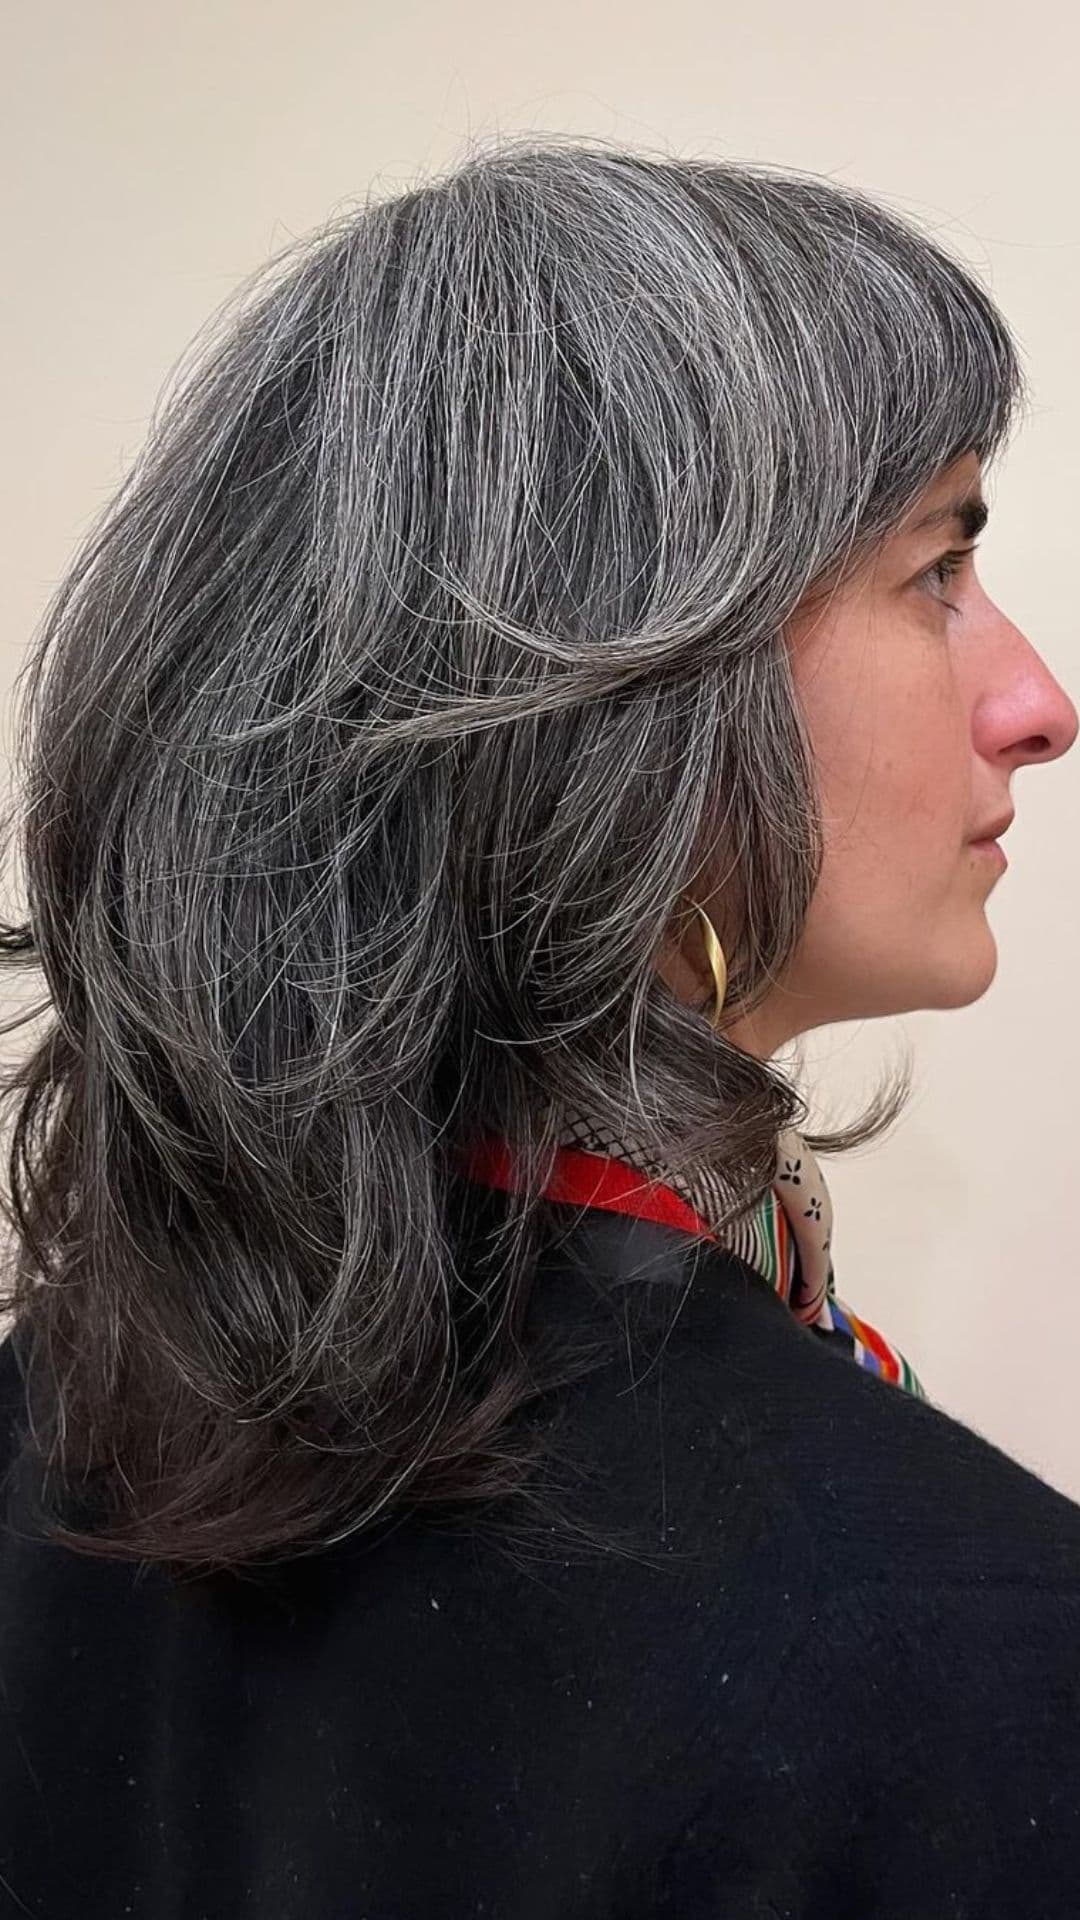 An older woman modelling a layered shag hairstyle.